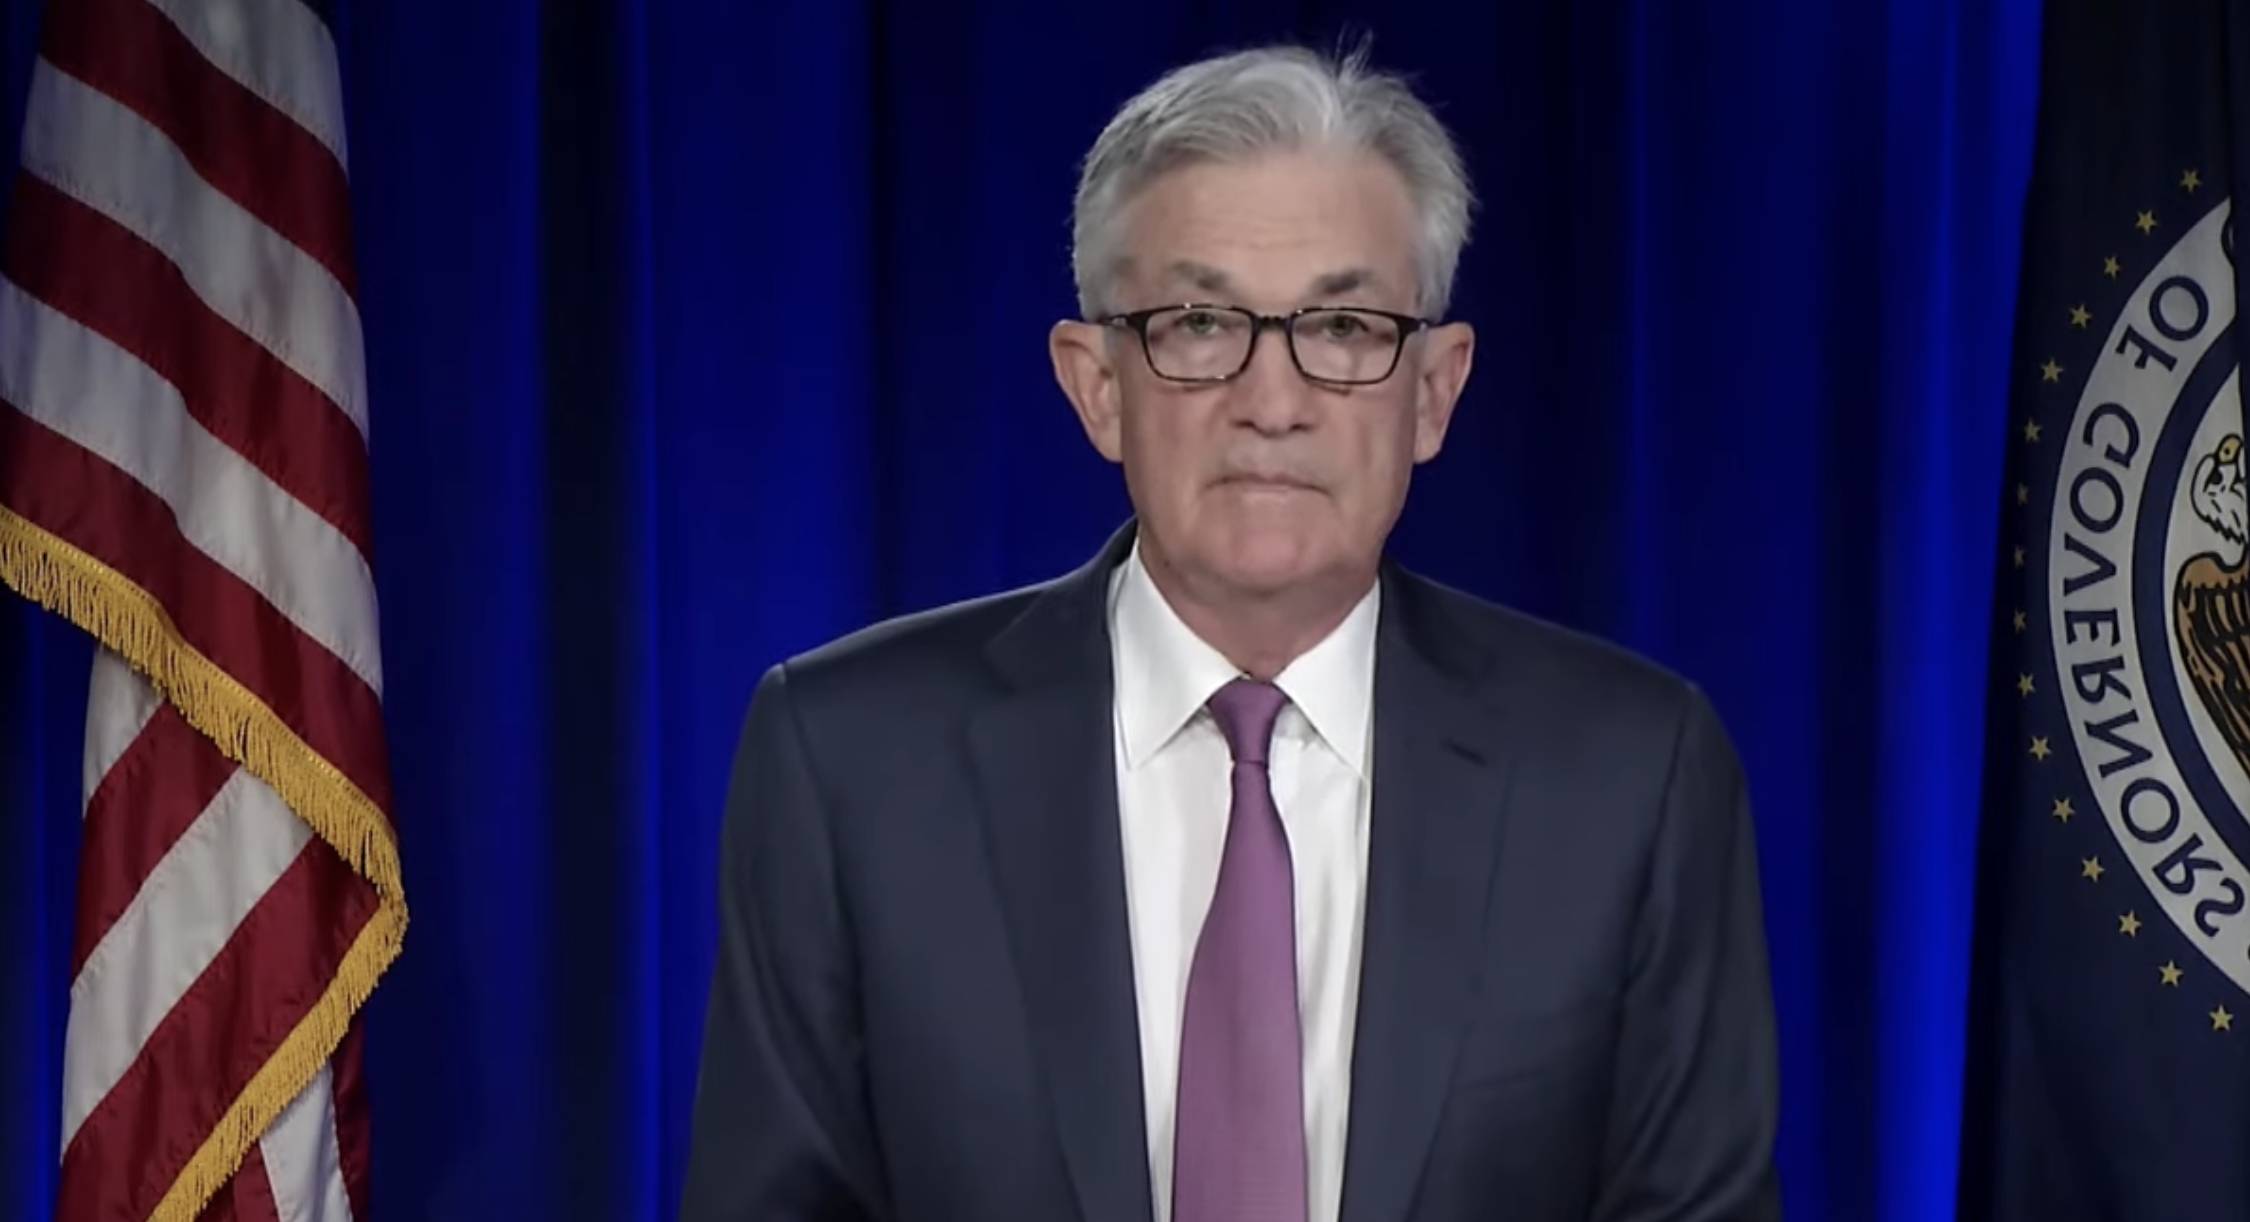 https://img3.s3wfg.com/web/img/images_uploaded/7/a/powell_fed_tipos.jpg